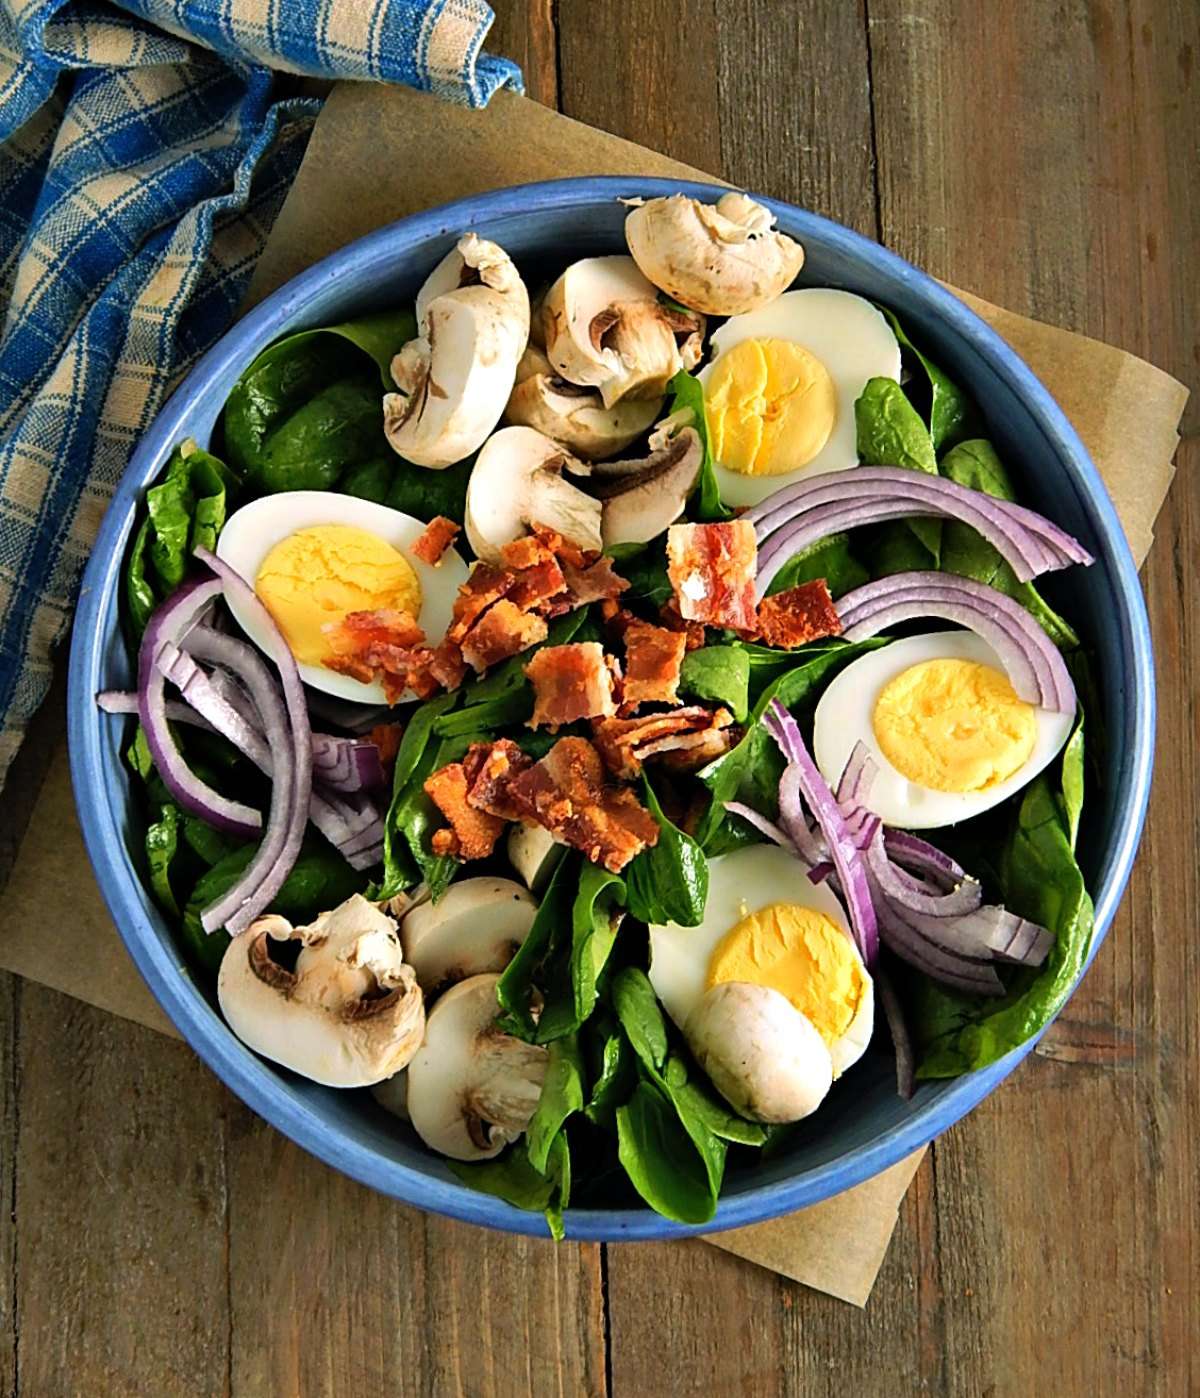 Classic Spinach Salad with Warm Bacon Dressing